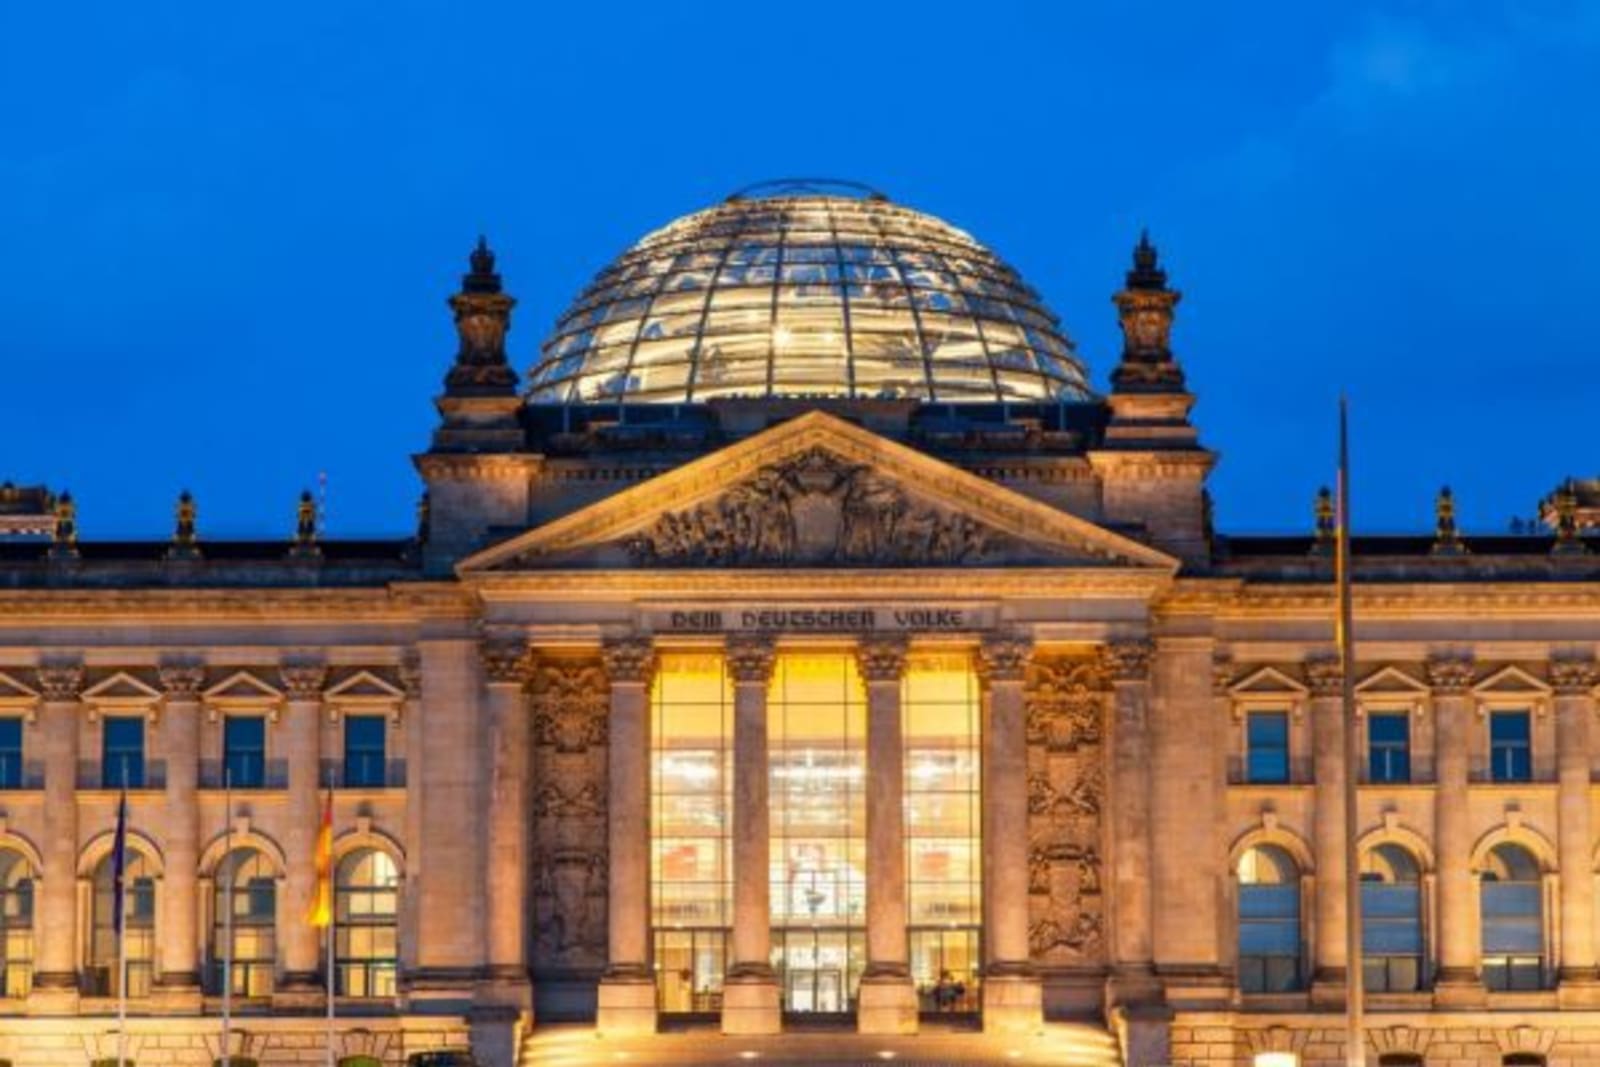 Night shot of the Reichstag, Berlin with lights shining through the entrance windows